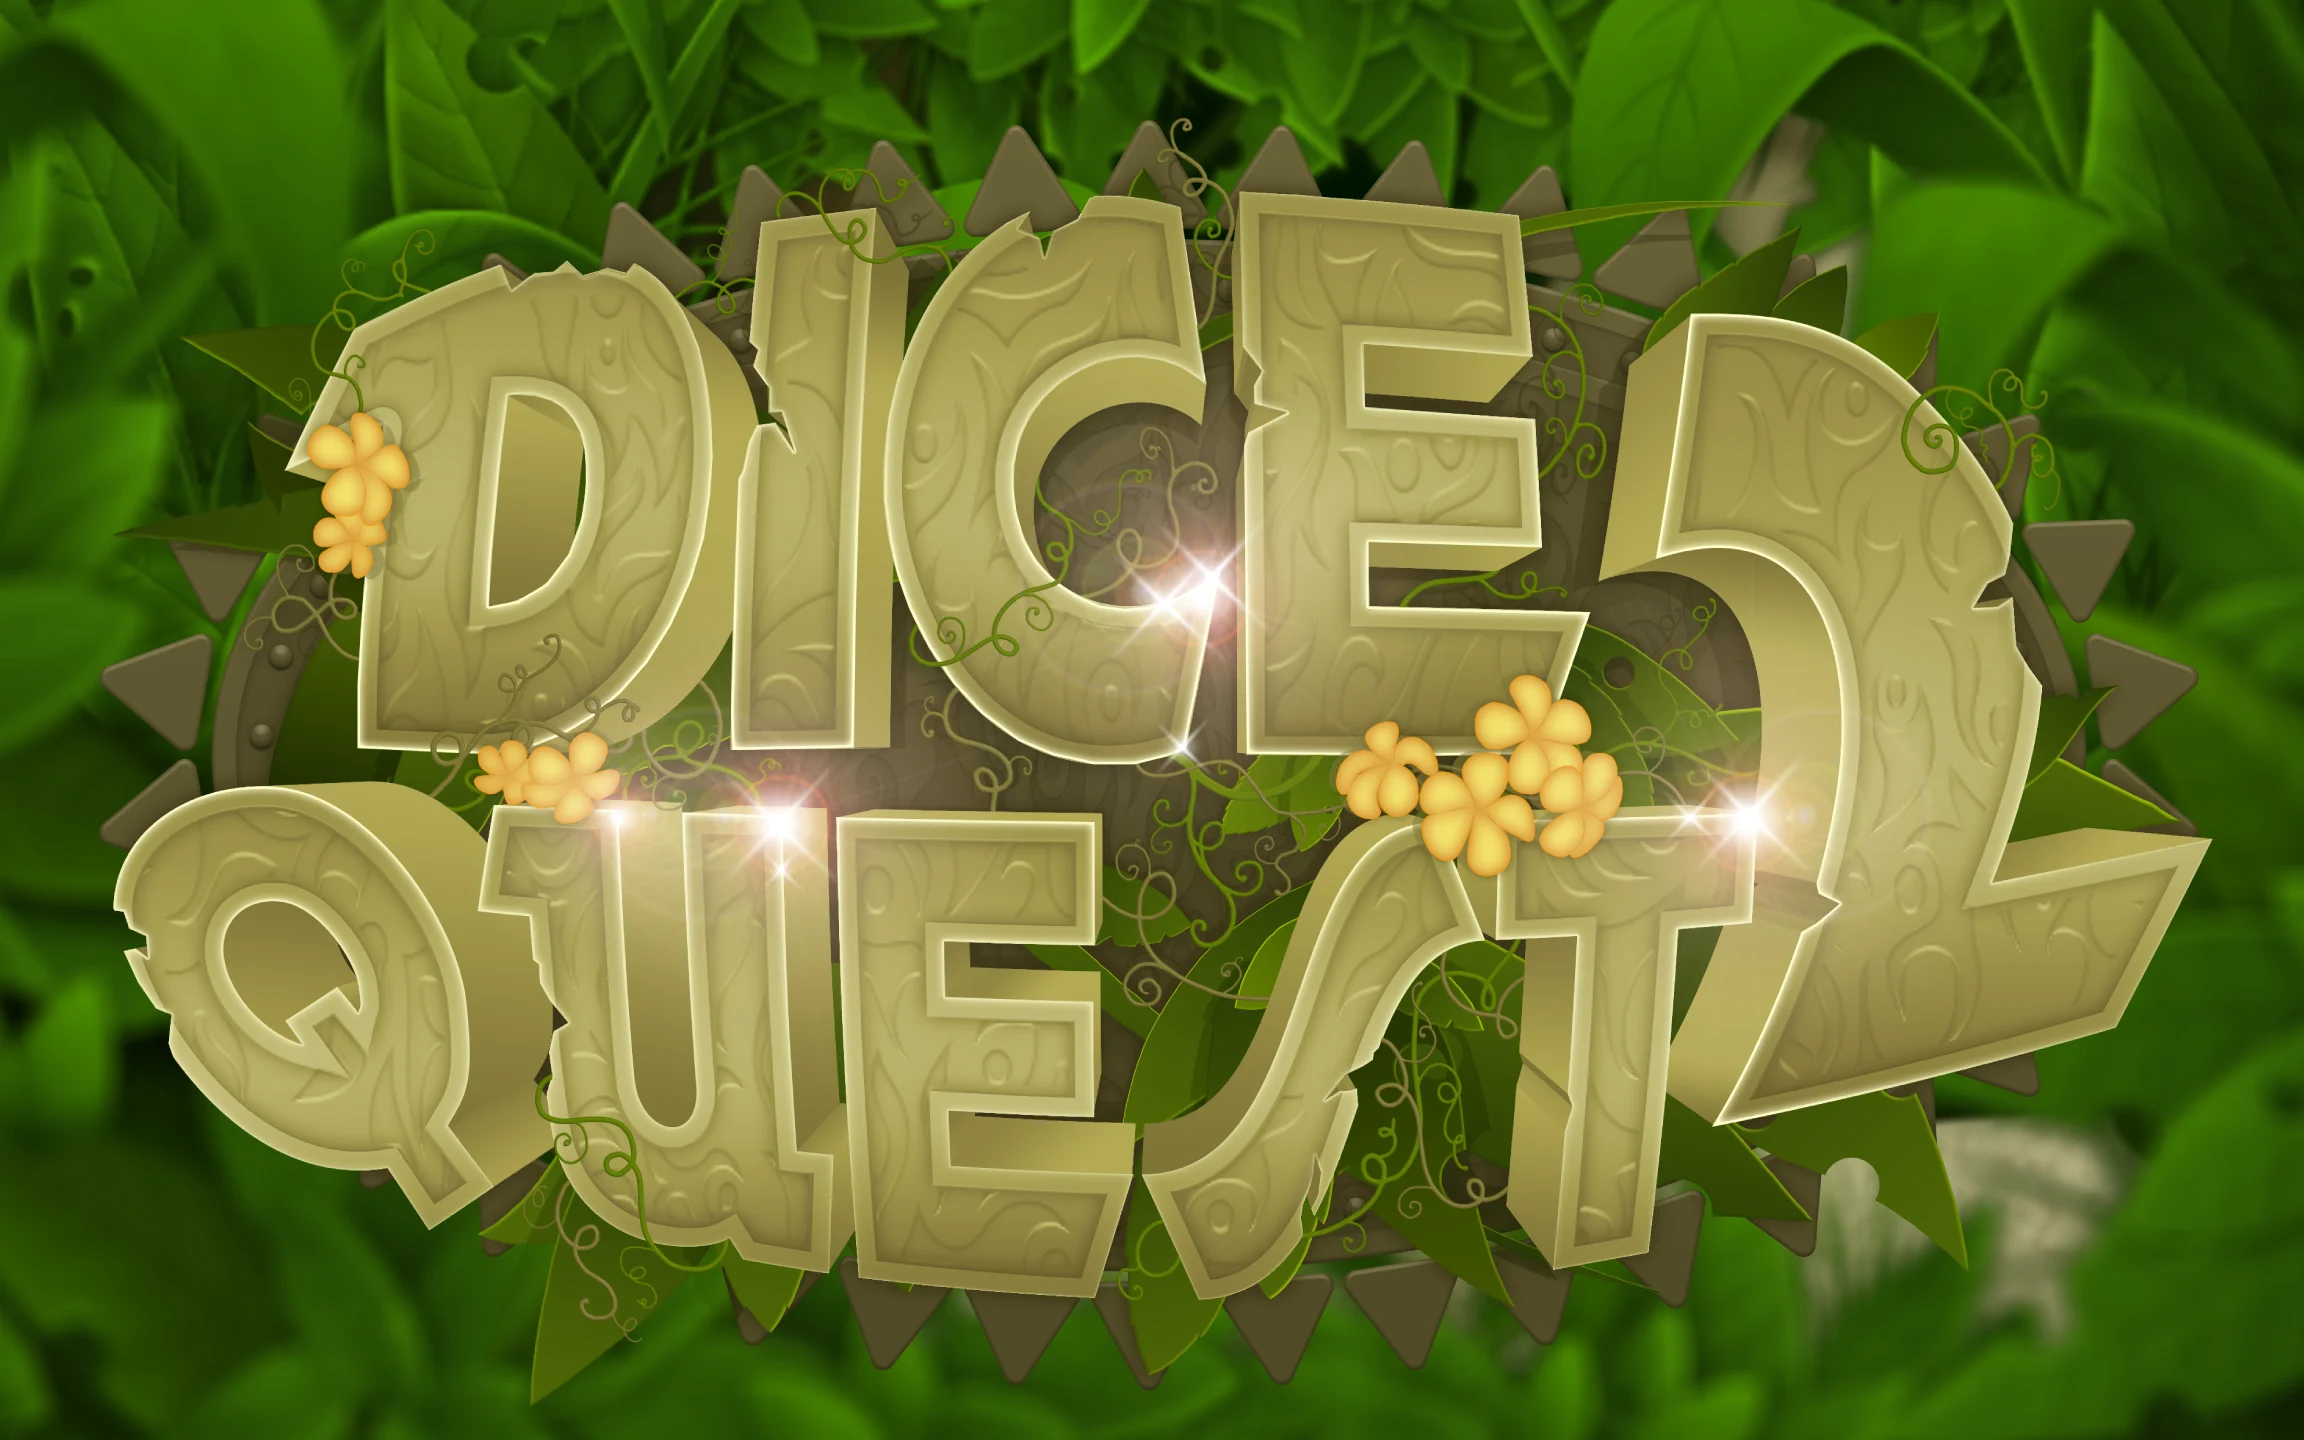 Play Dice Quest 2 on Starcasino.be online casino